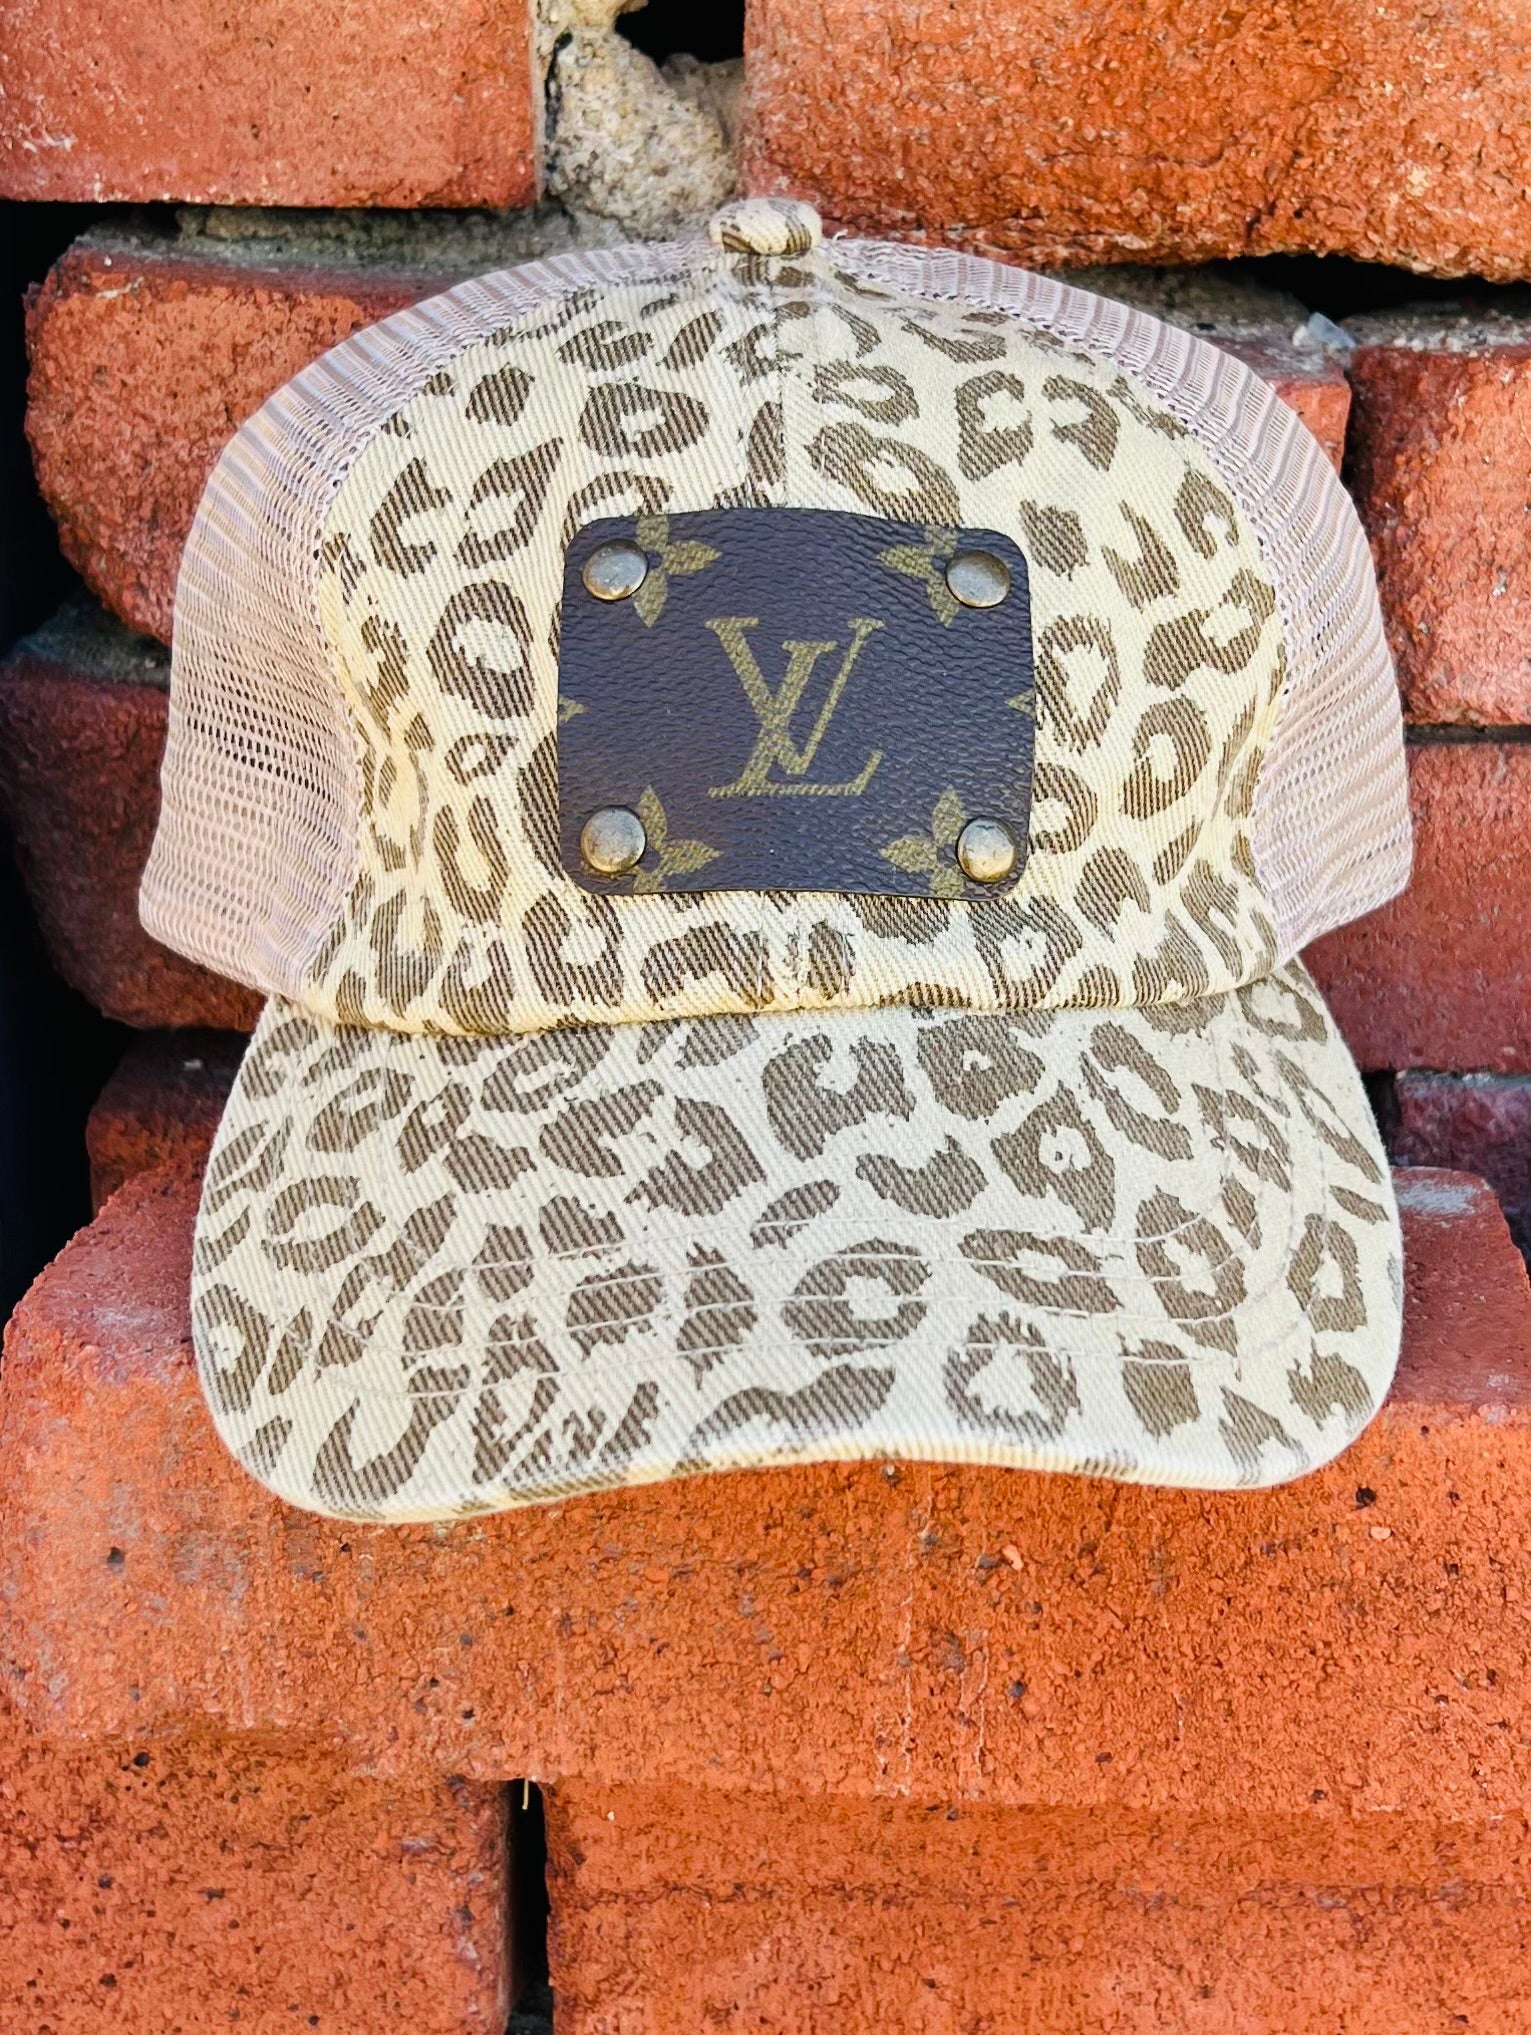 LEOPARD UPCYCLED LV CAP WITH MESH - Tres Chic Trendz